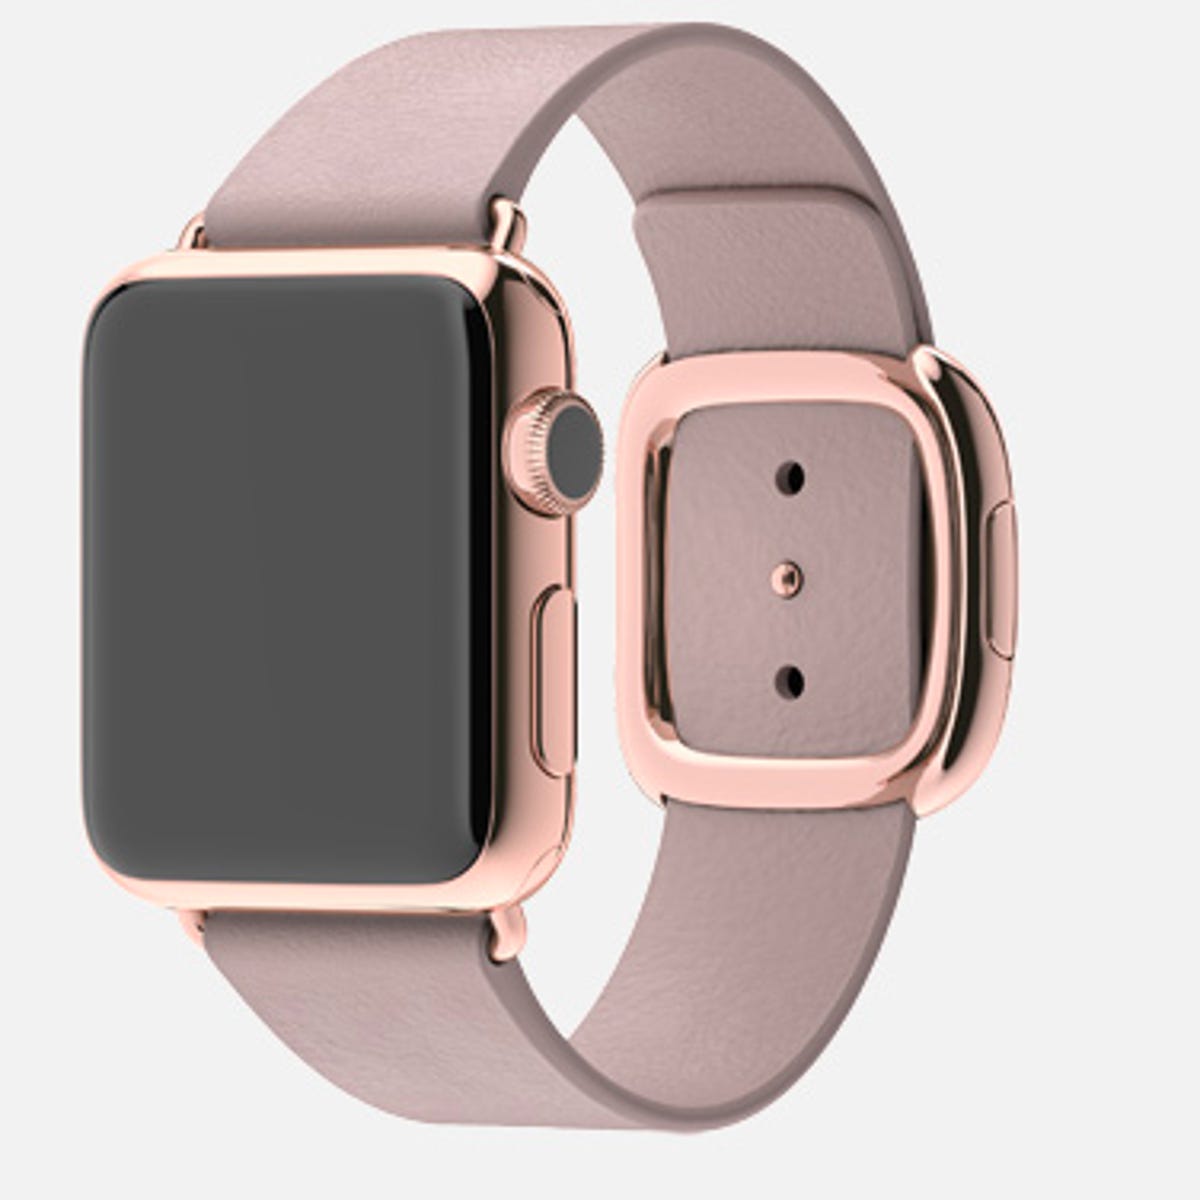 Rose Gold Apple Watch color could come to iPhone 6S